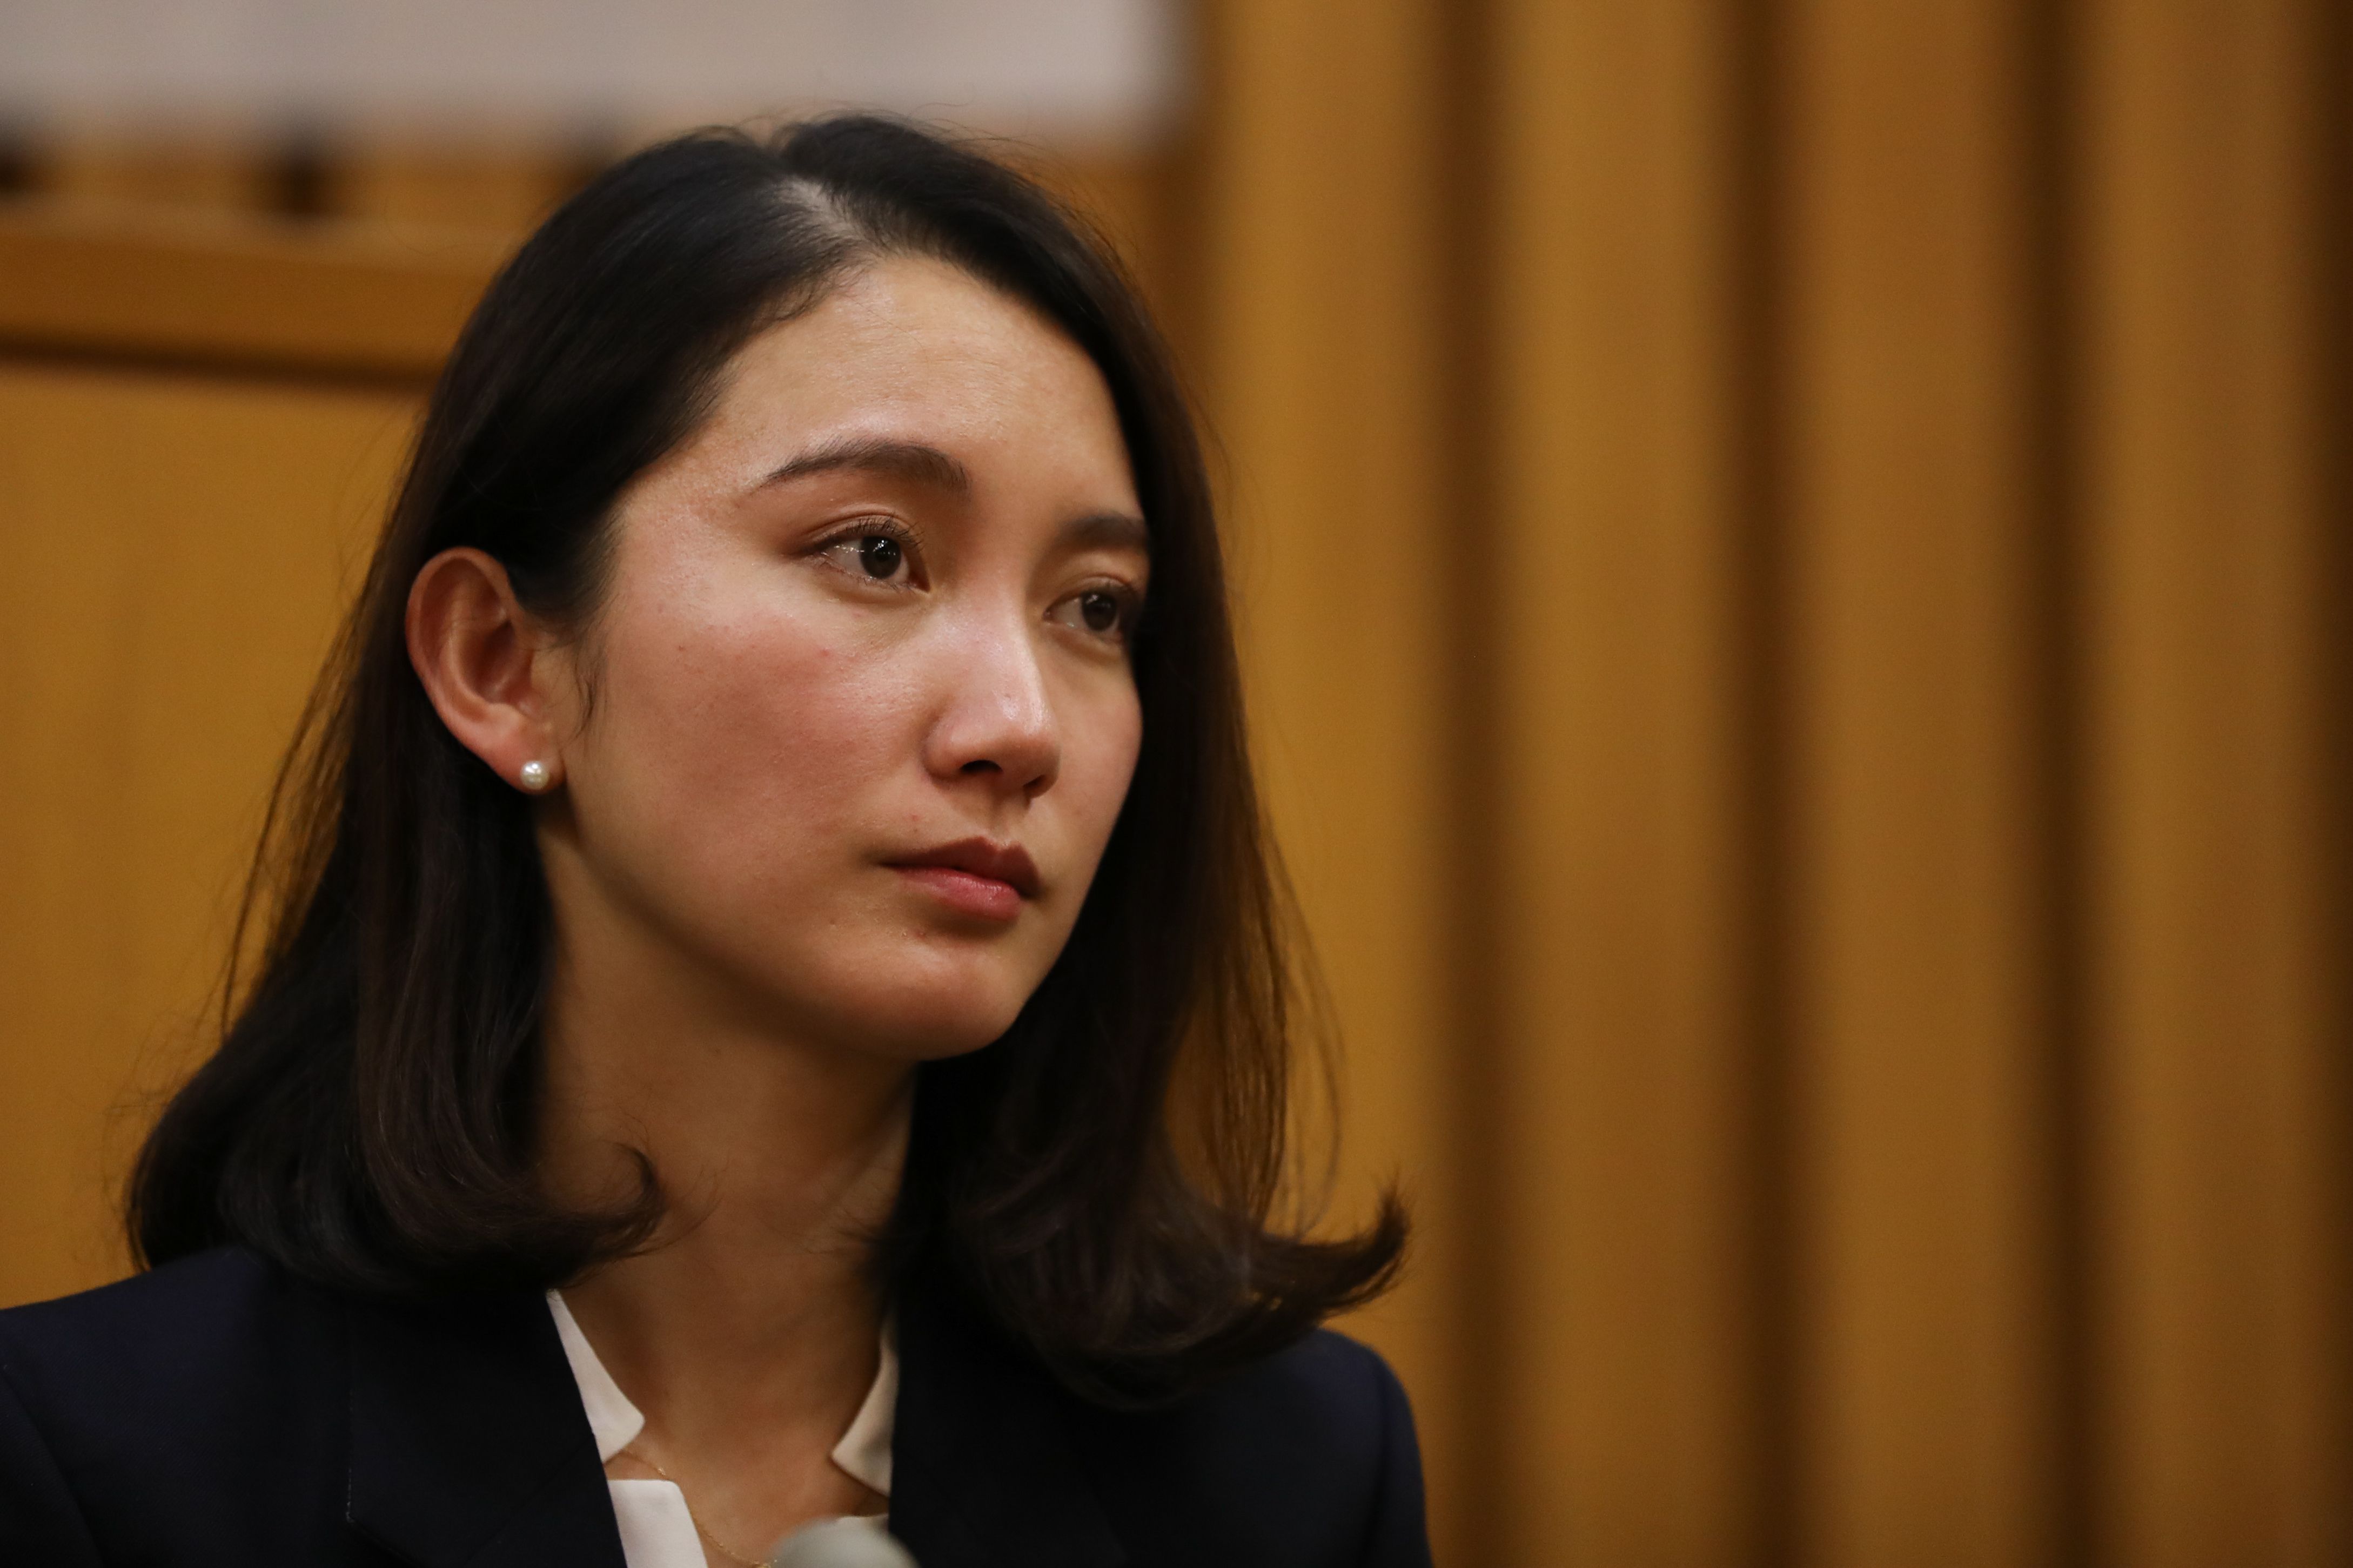 Shiori Ito won civil case against her alleged rapist. But Japan's rape laws  need overhaul, campaigners say | CNN